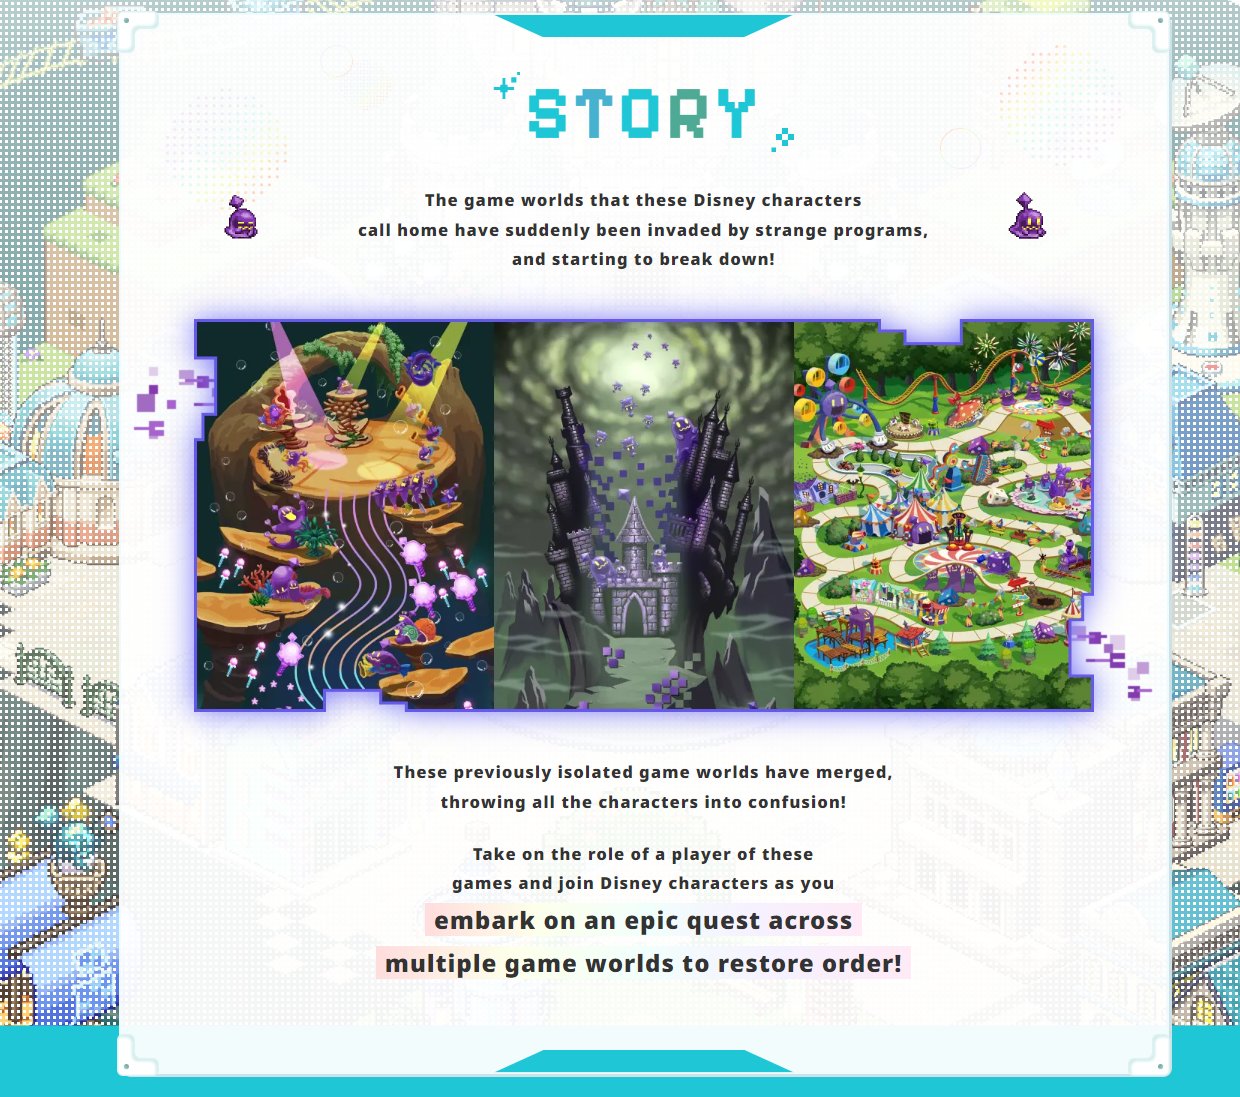 The image presents the "Story" section of a promotional material for "Disney Pixel RPG." It features a graphical depiction of the game's narrative, highlighting Disney worlds invaded by strange programs, causing chaos and disarray. The image contains three vivid illustrations: the first shows a whimsical path winding through a fantastical, candy-themed world, bustling with small characters; the second portrays a dark, eerie castle surrounded by a foreboding forest; and the third is a colorful, sprawling amusement park map filled with various attractions. The text emphasizes the plot where isolated game worlds have merged, urging players to take on the role of a hero to embark on quests across these worlds to restore order, adding a layer of urgency and adventure to the game's storyline.